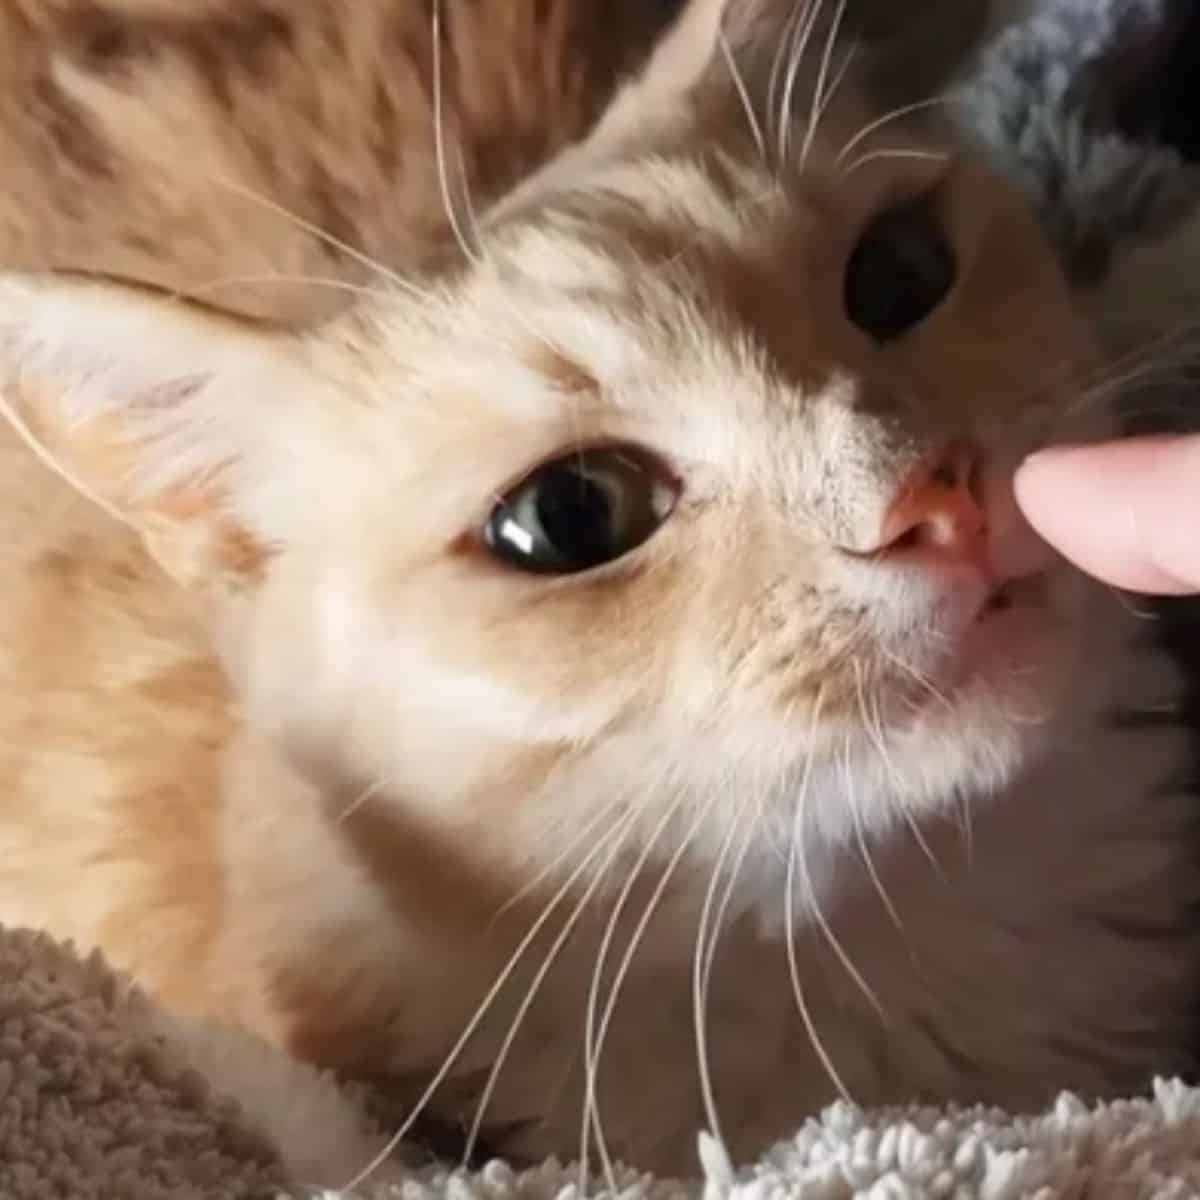 cat sniffing owners finger